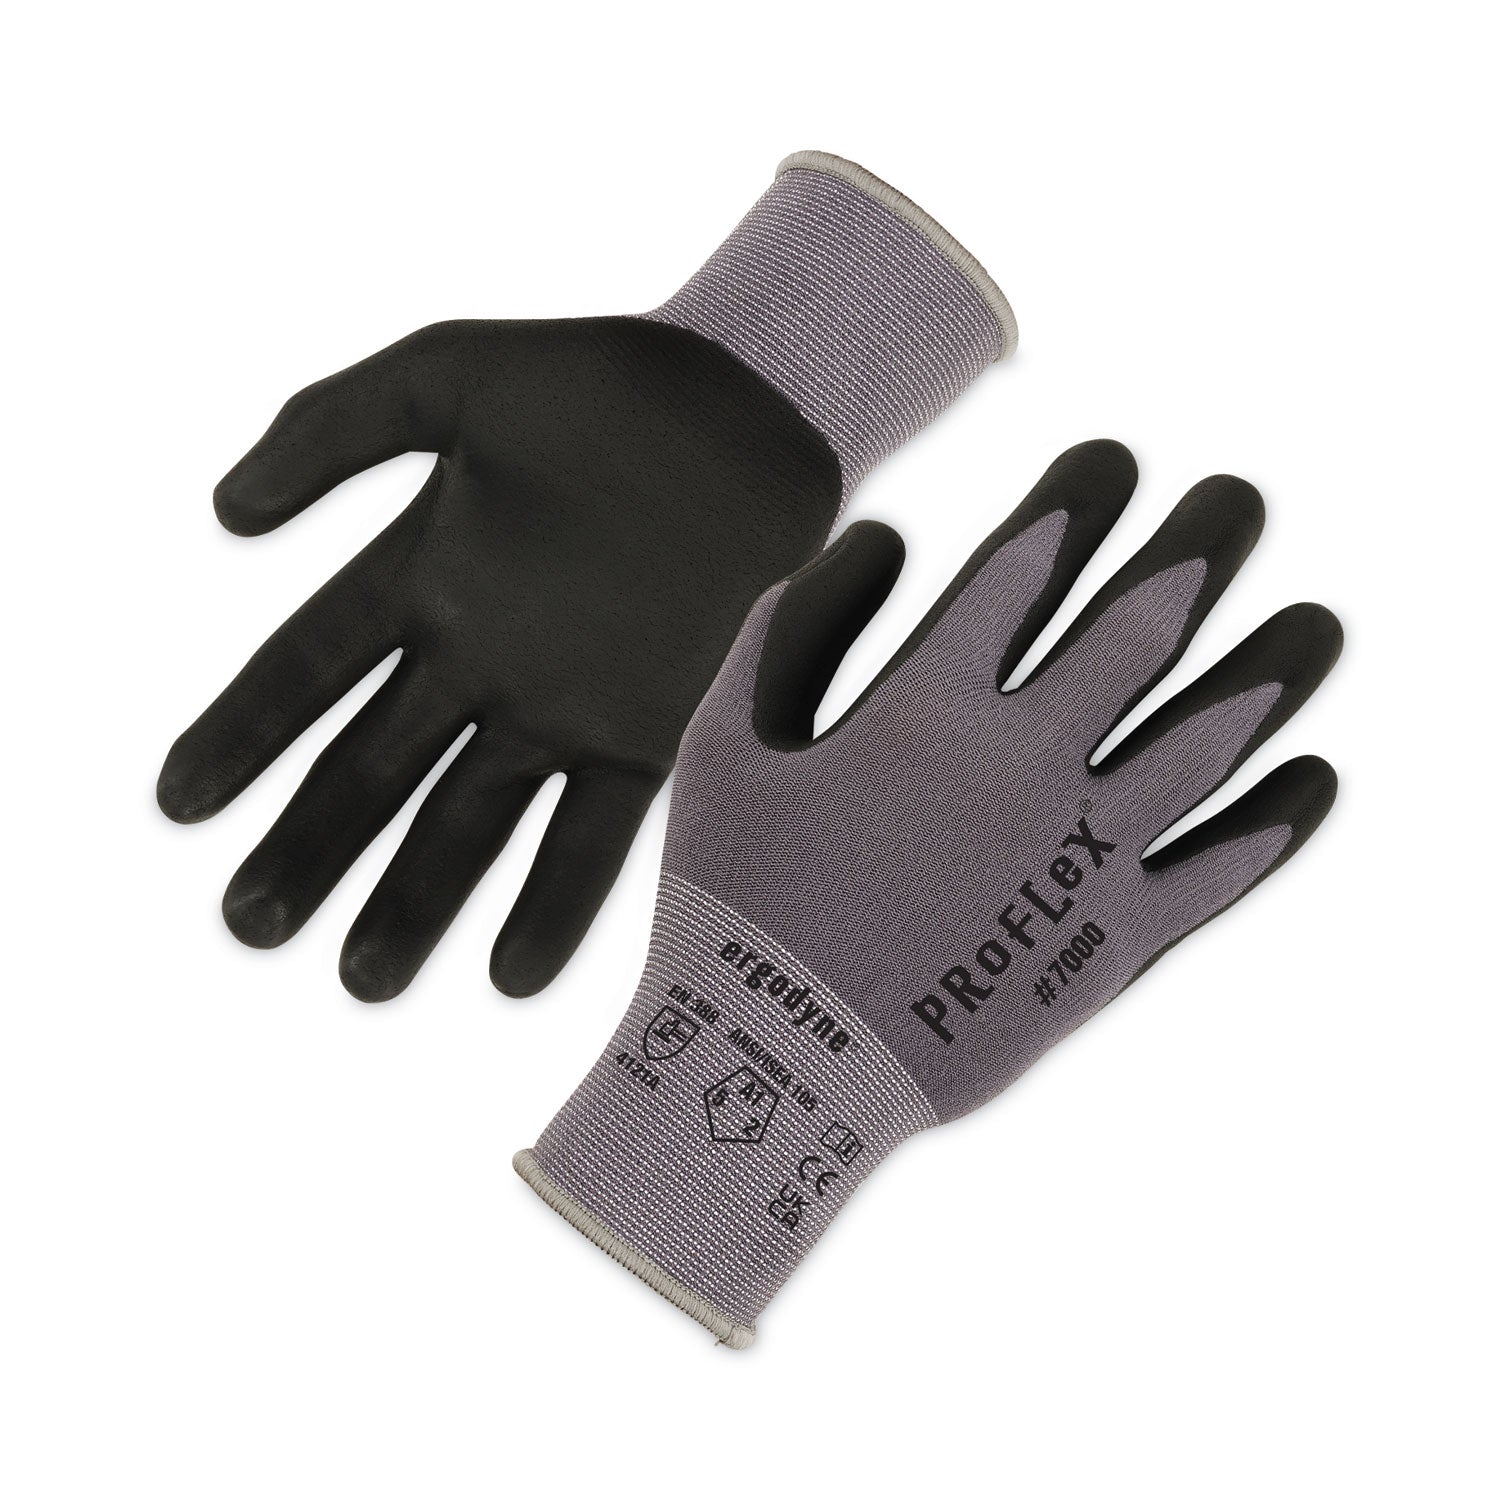 proflex-7000-nitrile-coated-gloves-microfoam-palm-gray-x-large-12-pairs-pack-ships-in-1-3-business-days_ego10365 - 1